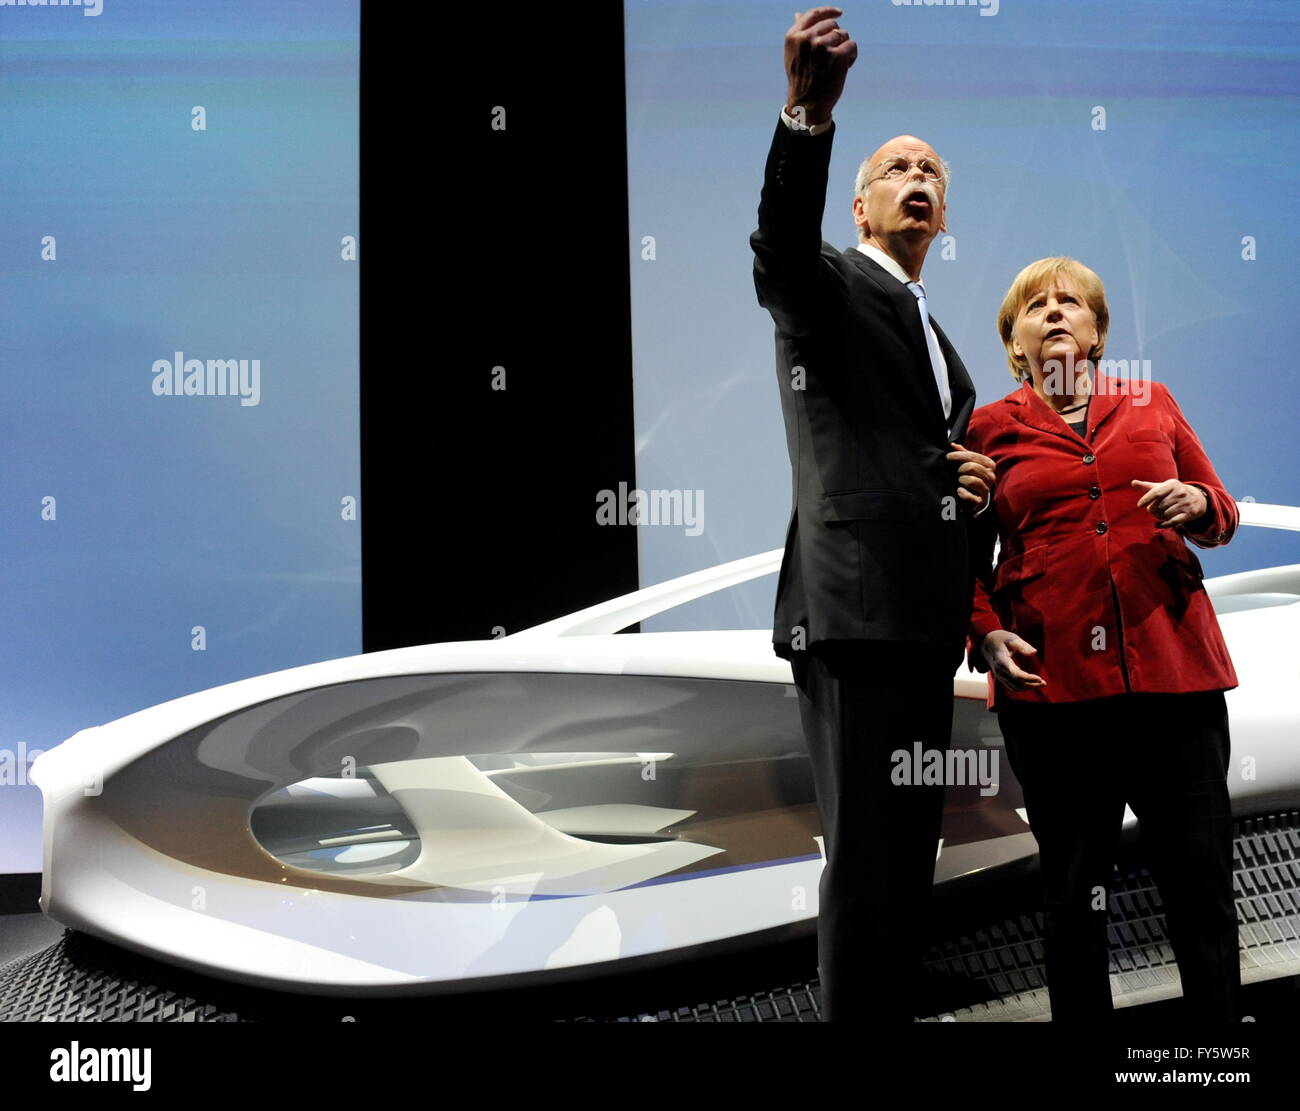 Stuttgart, Germany. 20th Jan, 2011. German Chancellor Angela Merkel (R) and Daimler CEO Dieter Zetsche (L) at the celebrations of 125 years of automobile at Mercedes Benz museum in Stuttgart, Germany, 20 January 2011. Photo: Bernd Weissbrod/dpa/Alamy Live News Stock Photo